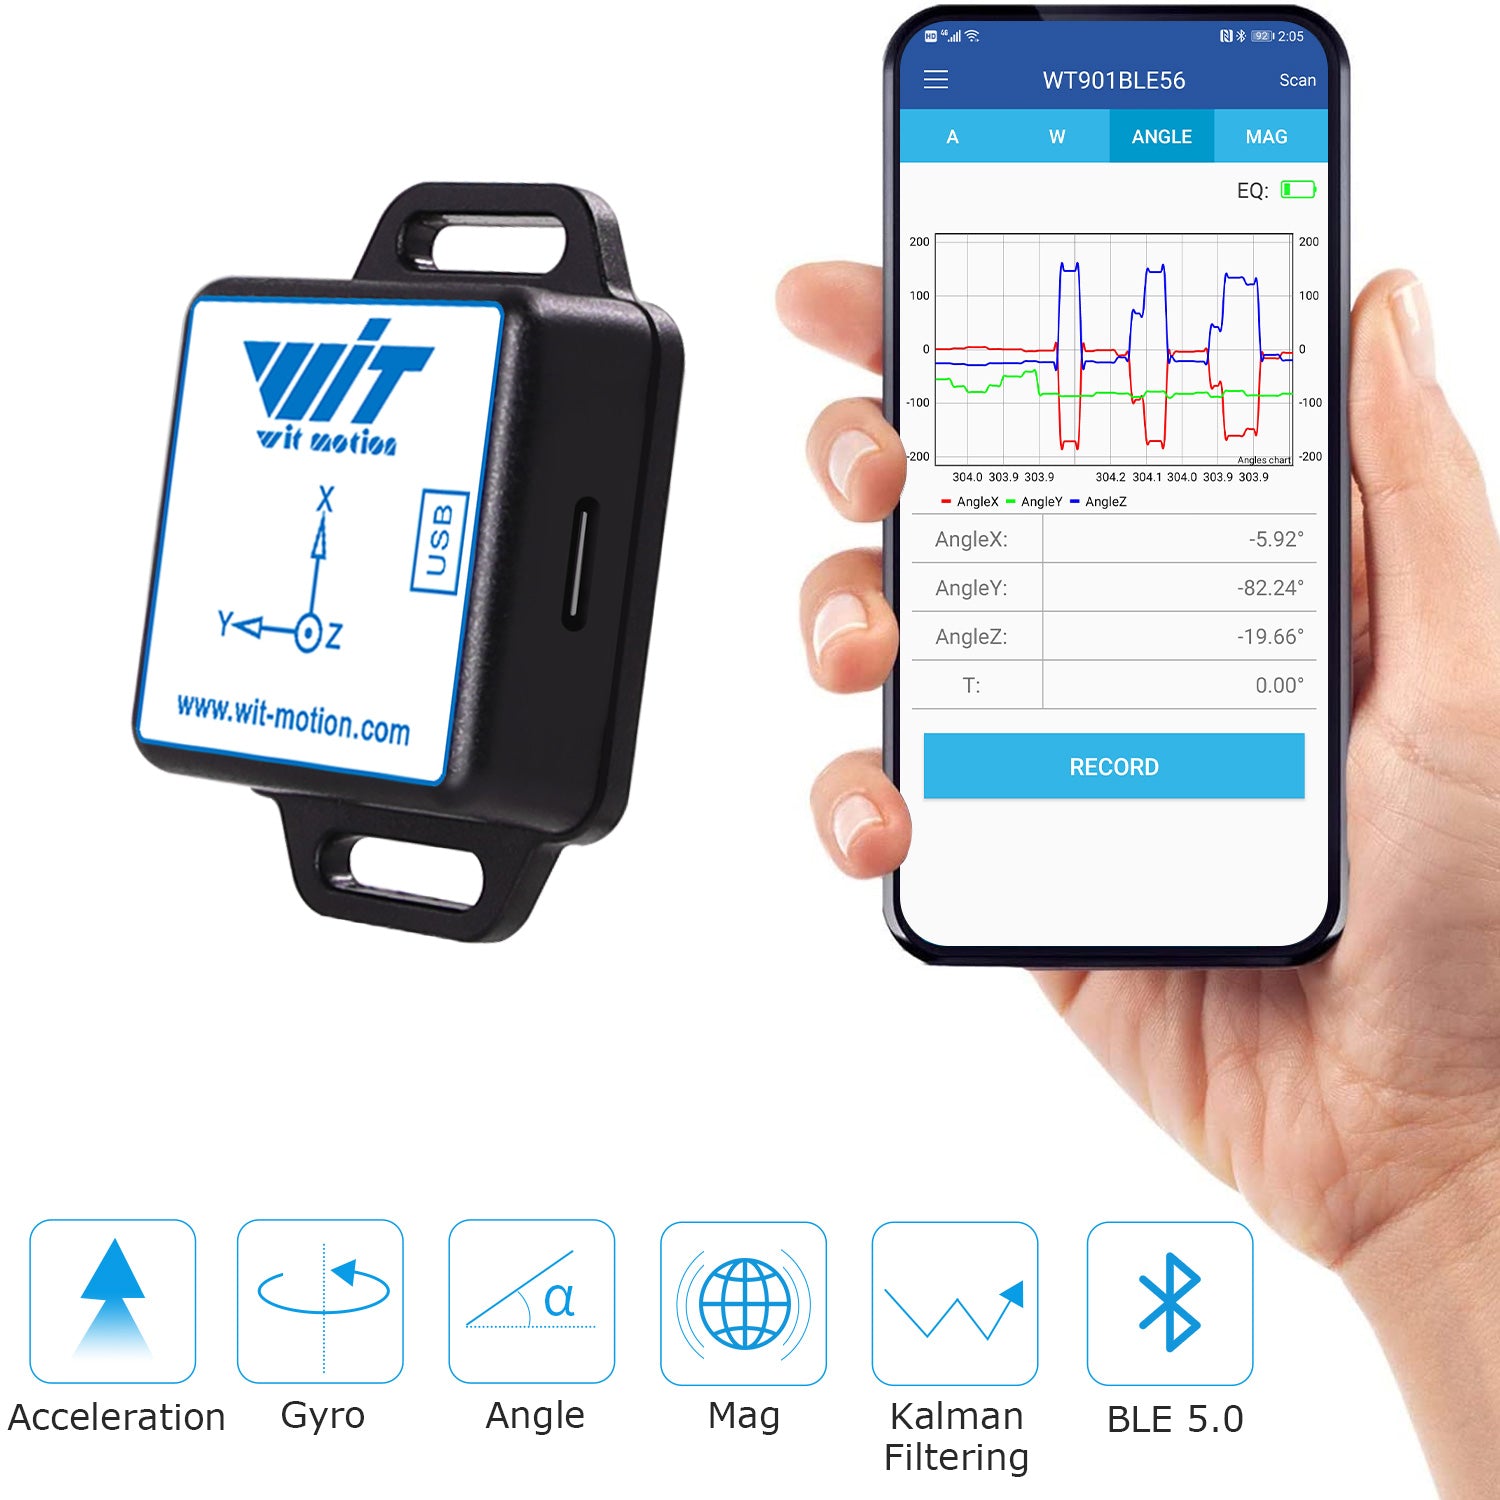 [Bluetooth 5.0 Accelerometer+Inclinometer] WT901BLECL MPU9250 High-Precision 9-axis Gyroscope+Angle(XY 0.05° Accuracy)+Magnetometer with Kalman Filter, Low-Power 3-axis AHRS IMU Sensor for Arduino - WitMotion